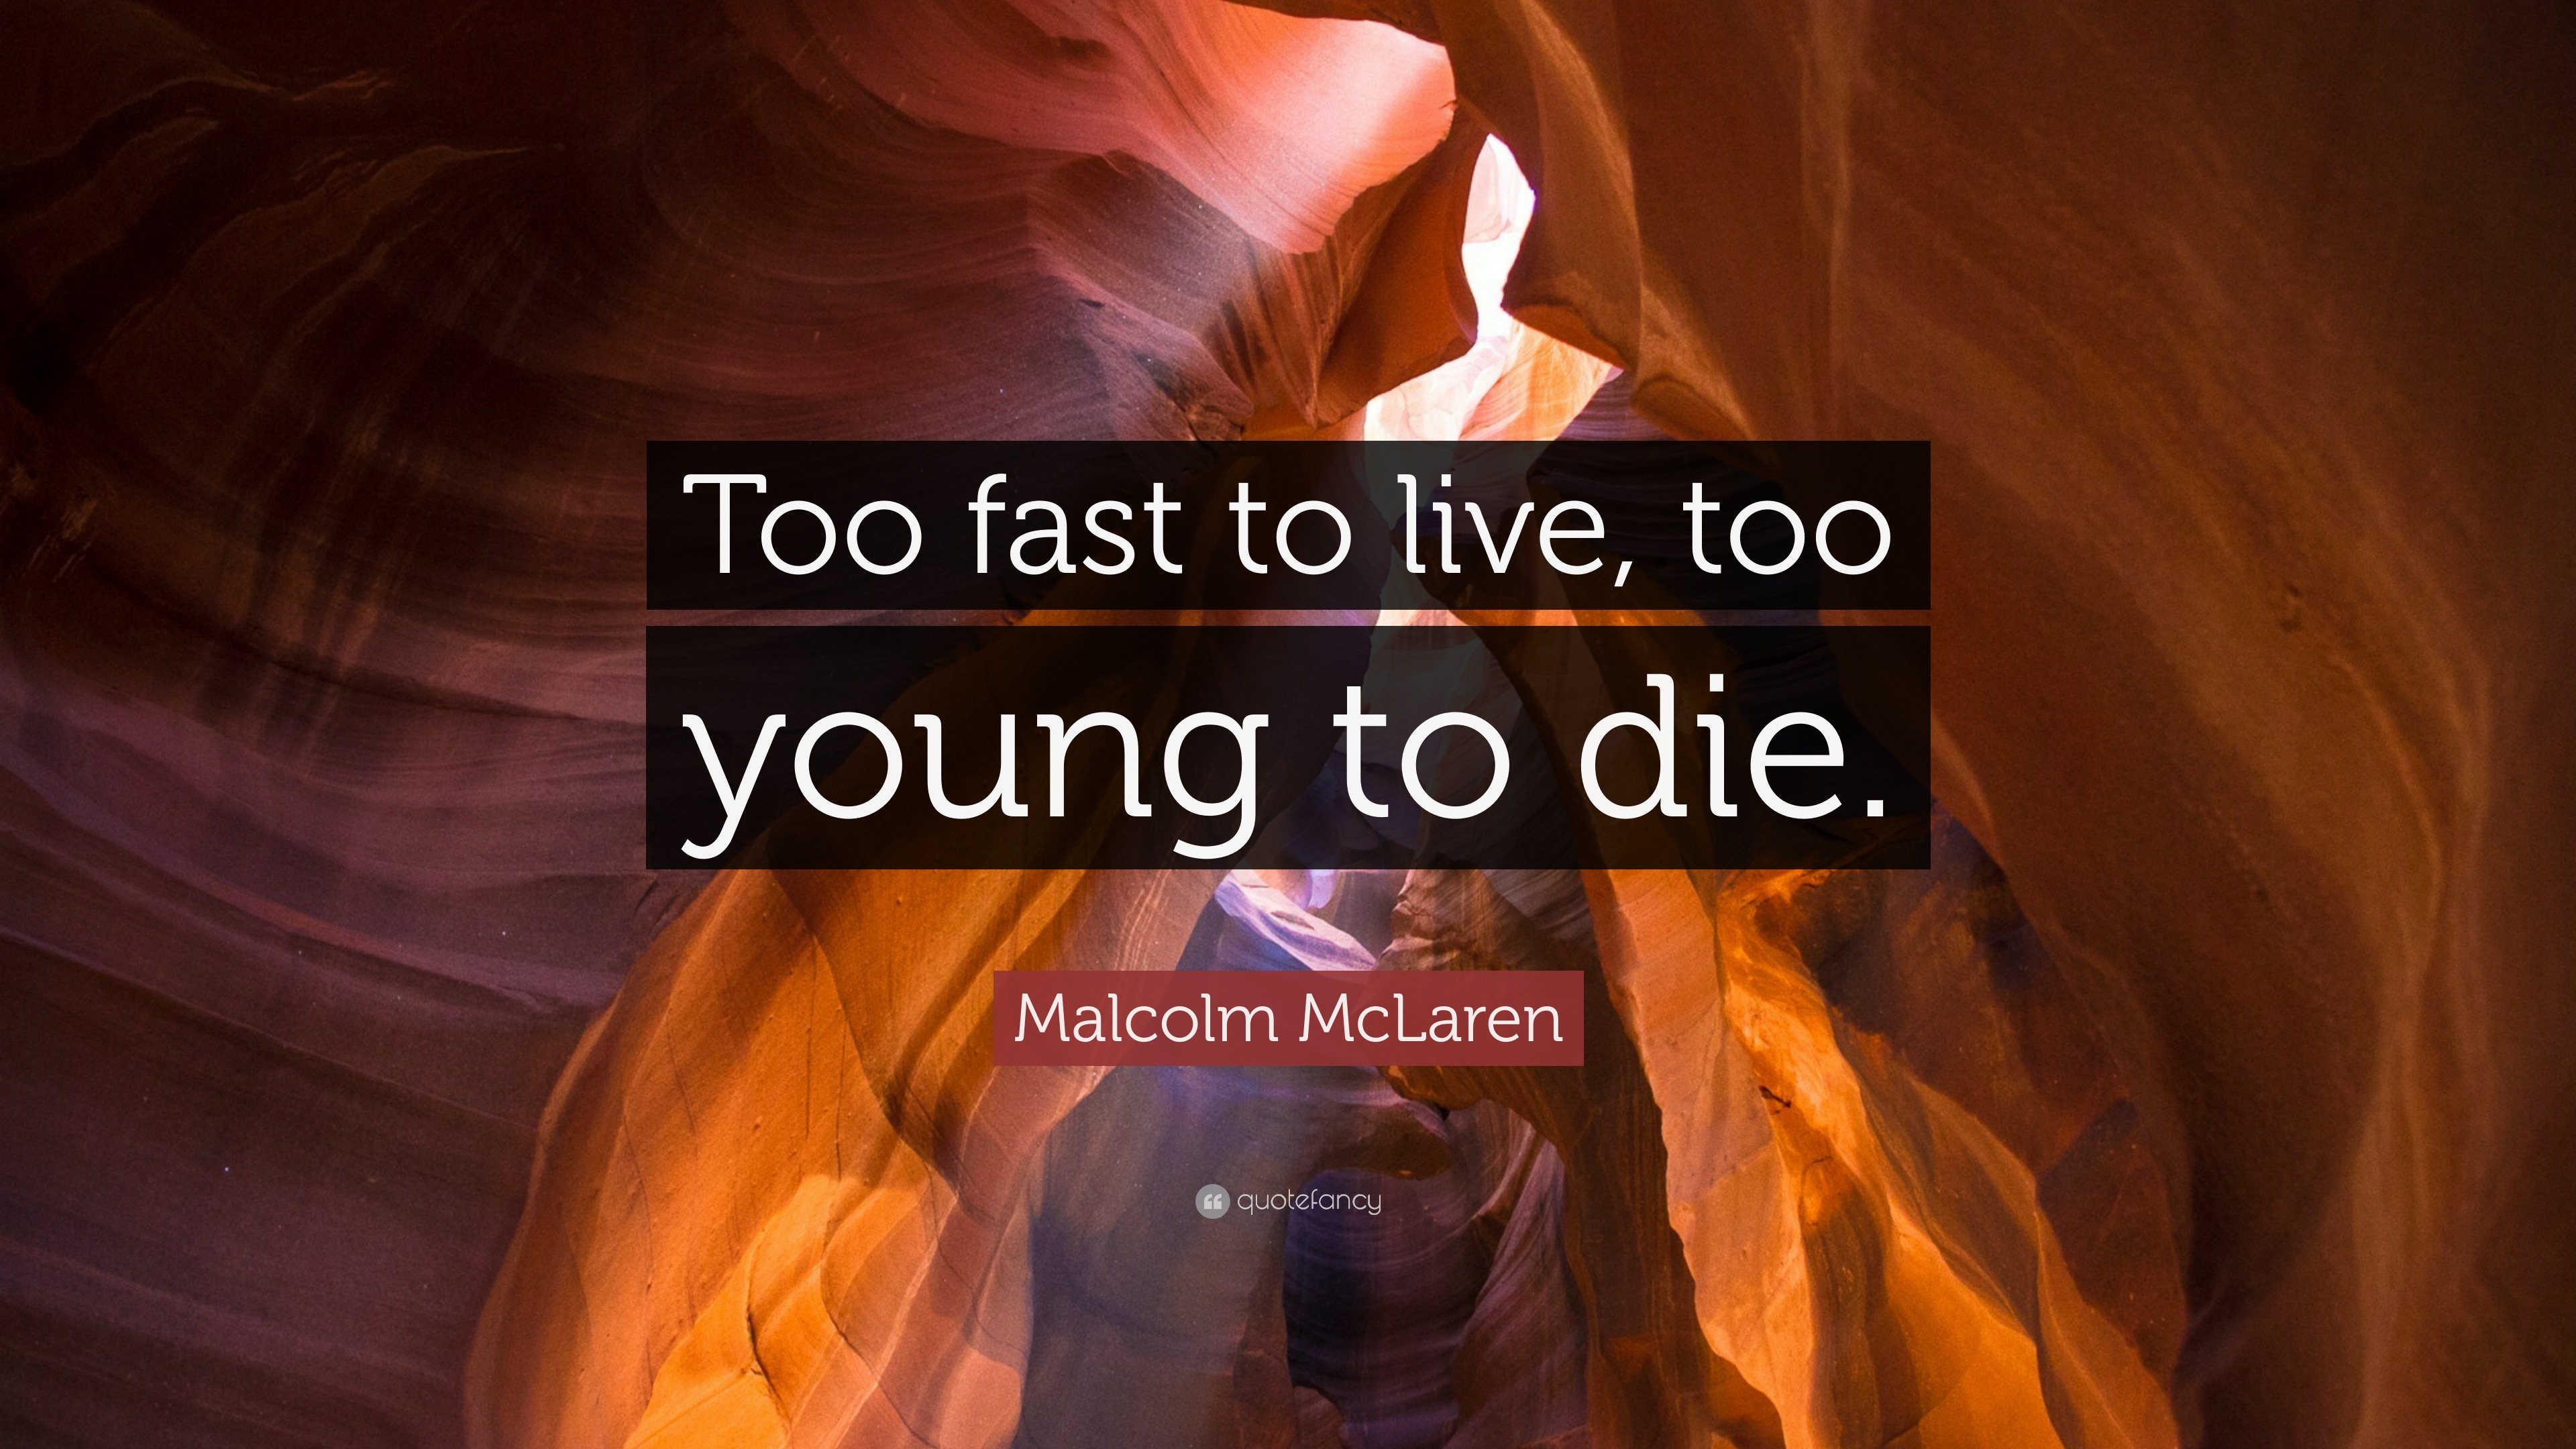 Malcolm McLaren Quote: “Too fast to live, too young to die.”